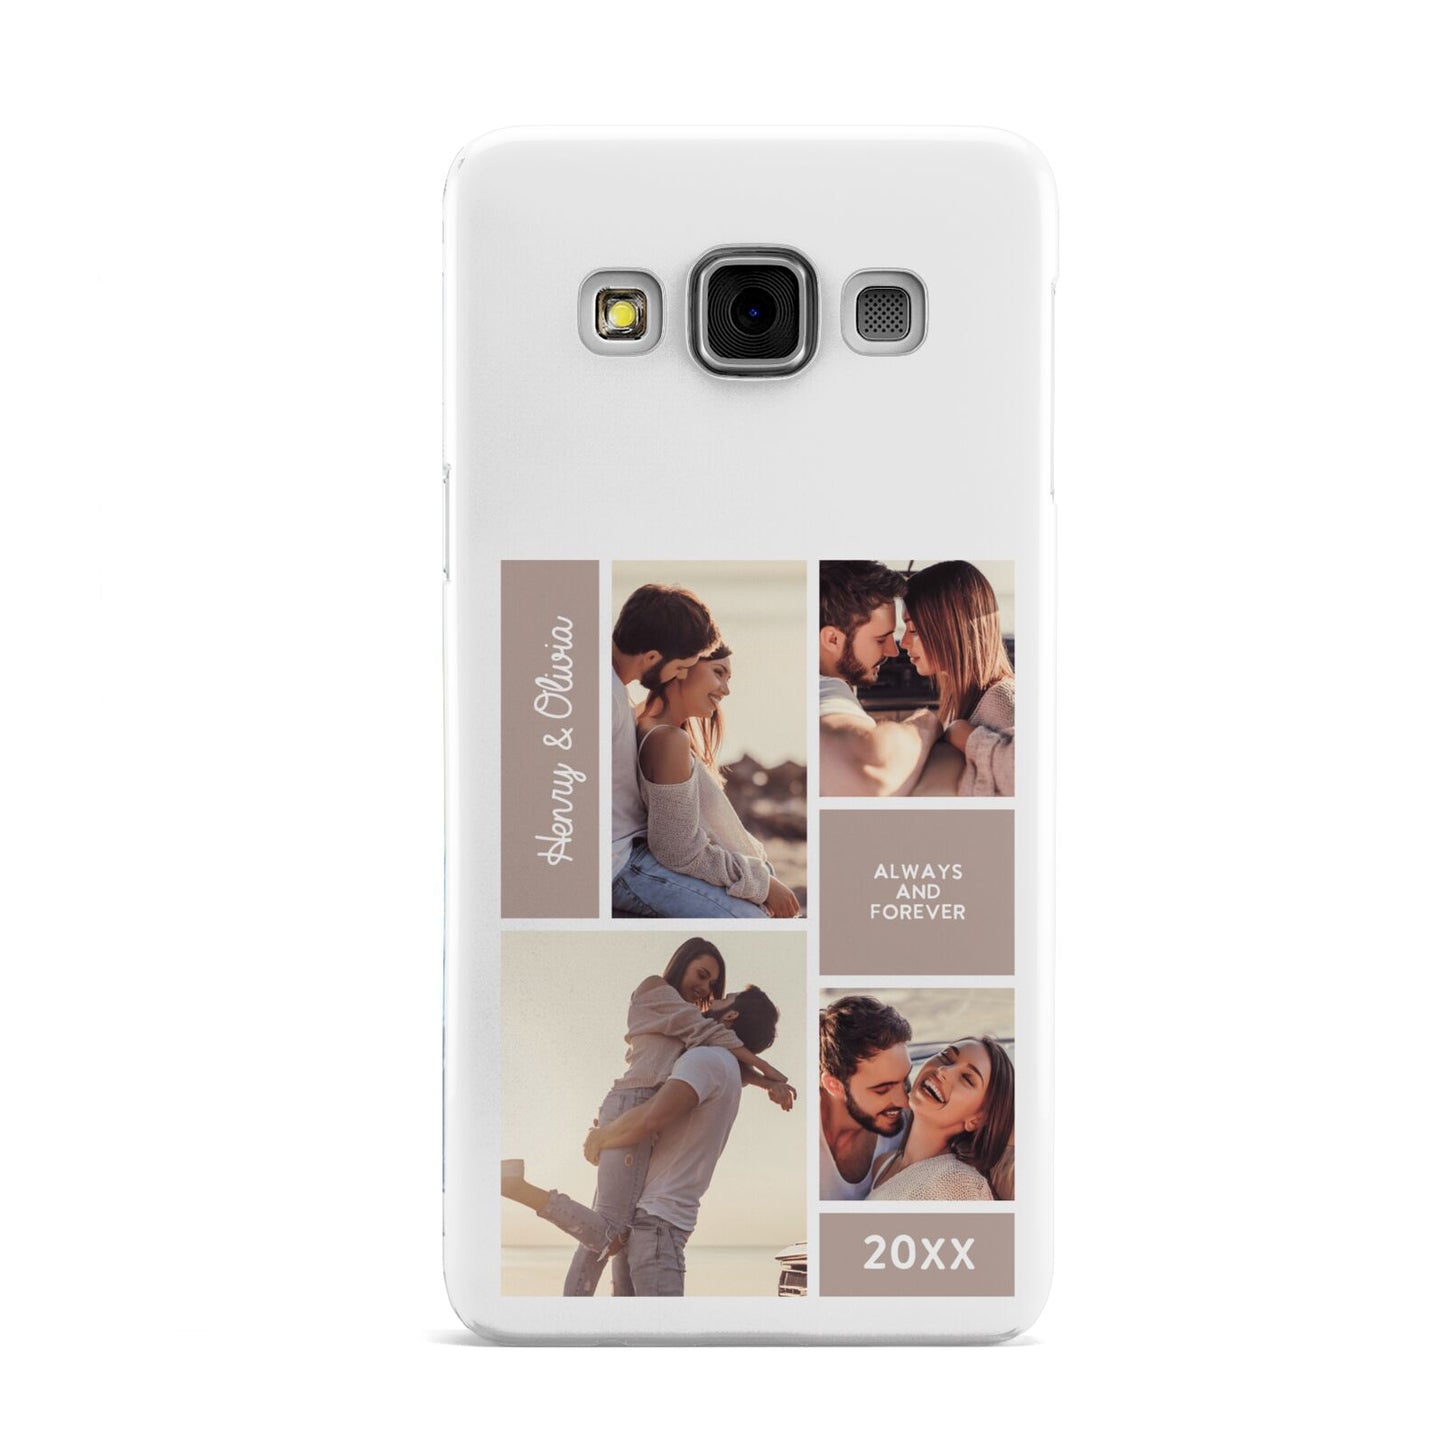 Couples Valentine Photo Collage Personalised Samsung Galaxy A3 Case